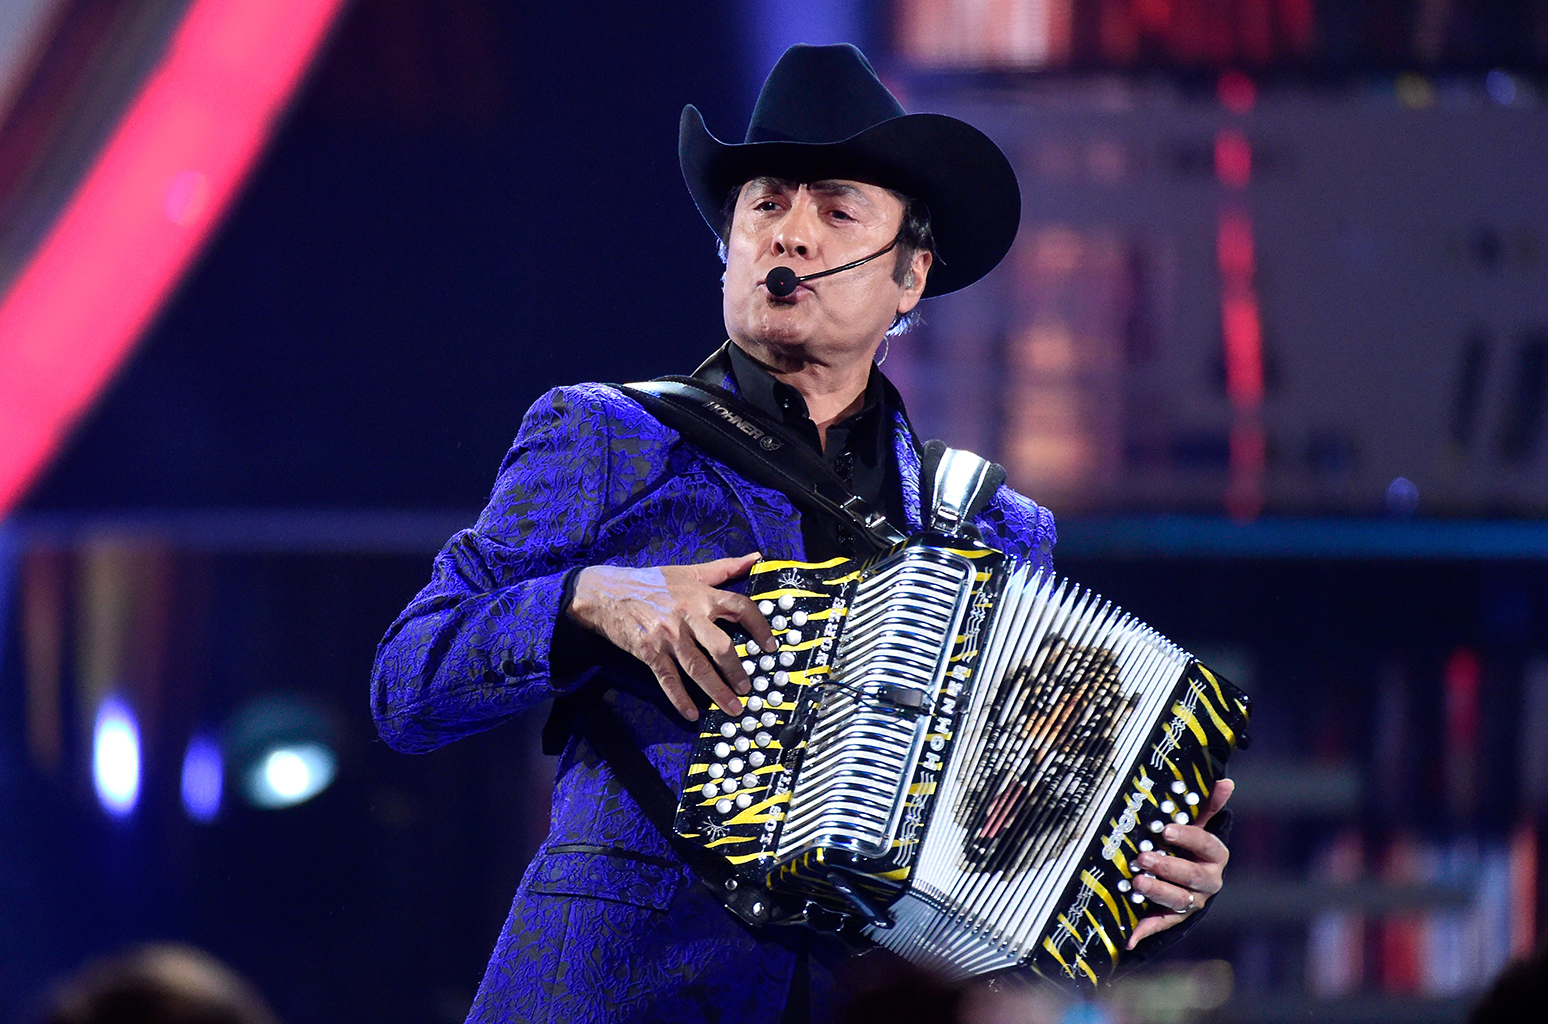 LAS VEGAS, NV - NOVEMBER 19:  Musician Jorge Hernandez of Los Tigres del Norte performs onstage during the 16th Latin GRAMMY Awards at the MGM Grand Garden Arena on November 19, 2015 in Las Vegas, Nevada.  (Photo by Frazer Harrison/Getty Images for LARAS)